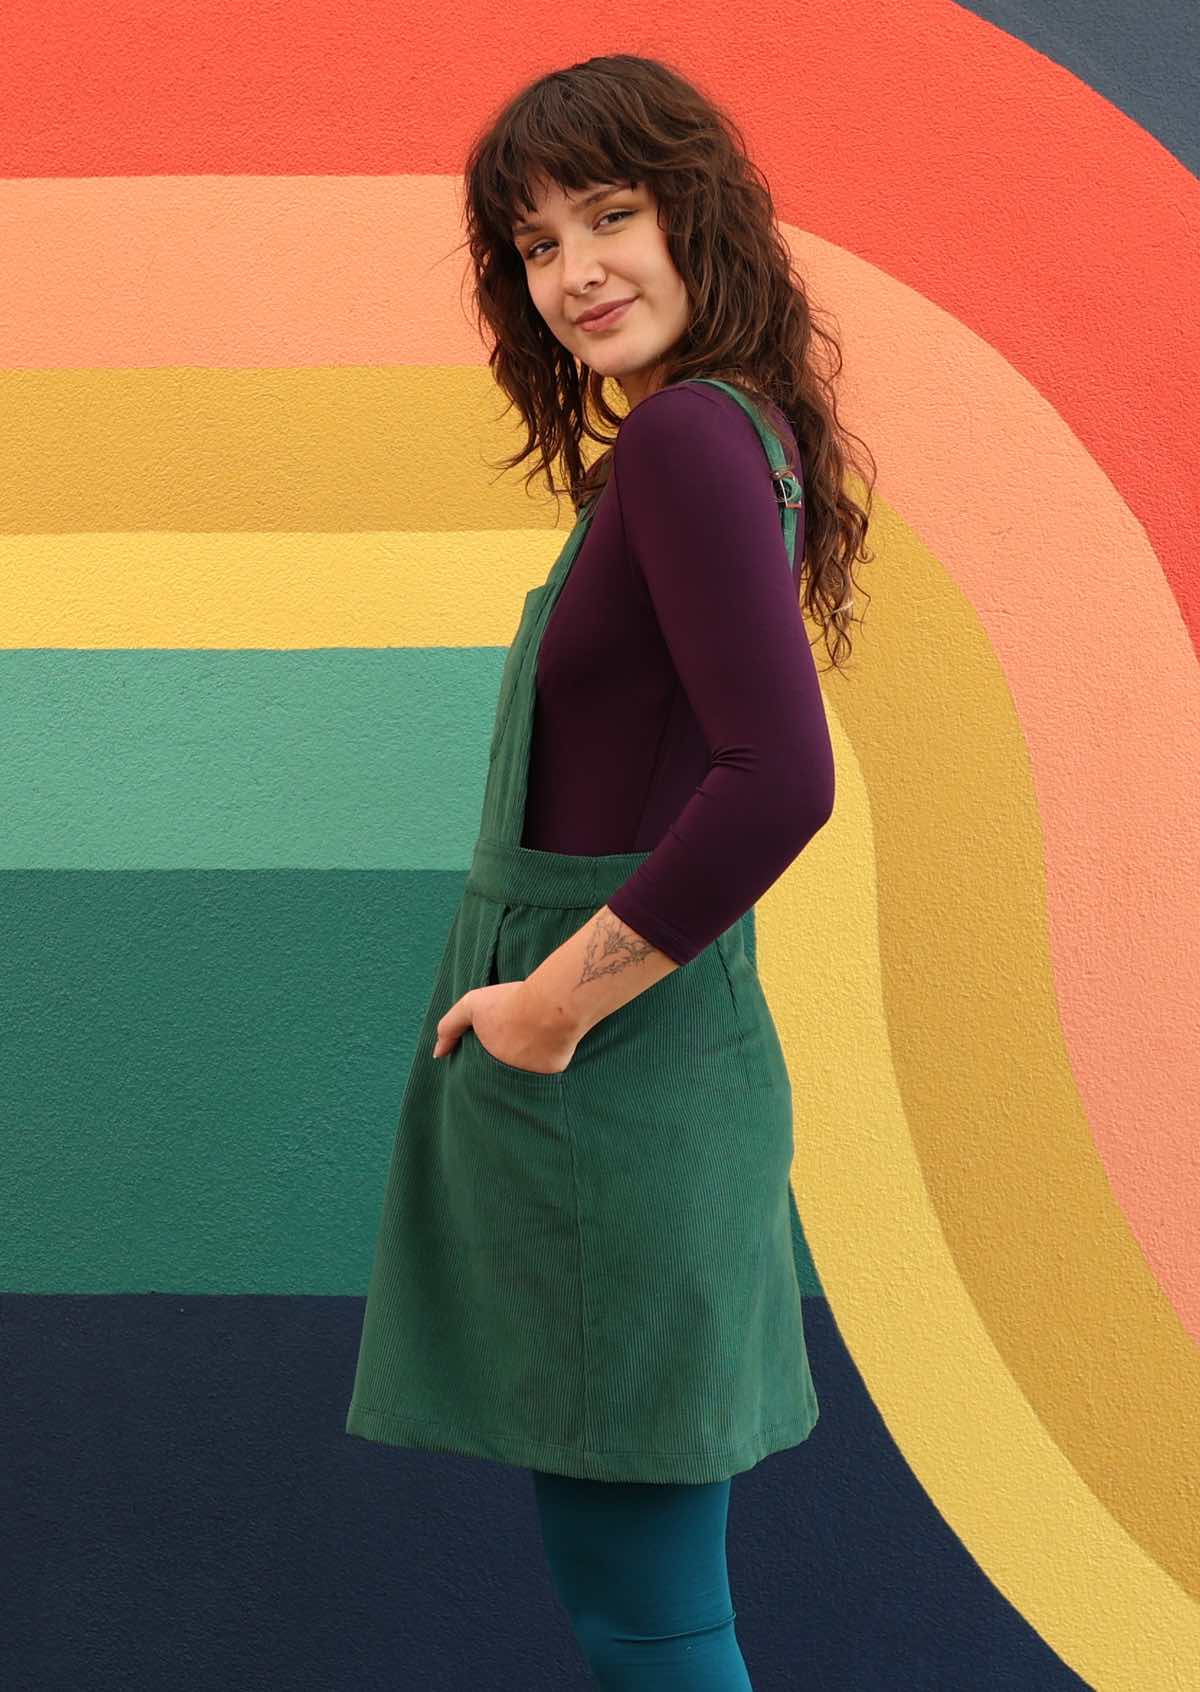 woman wearing green corduroy pinafore over purple top and teal leggings side view